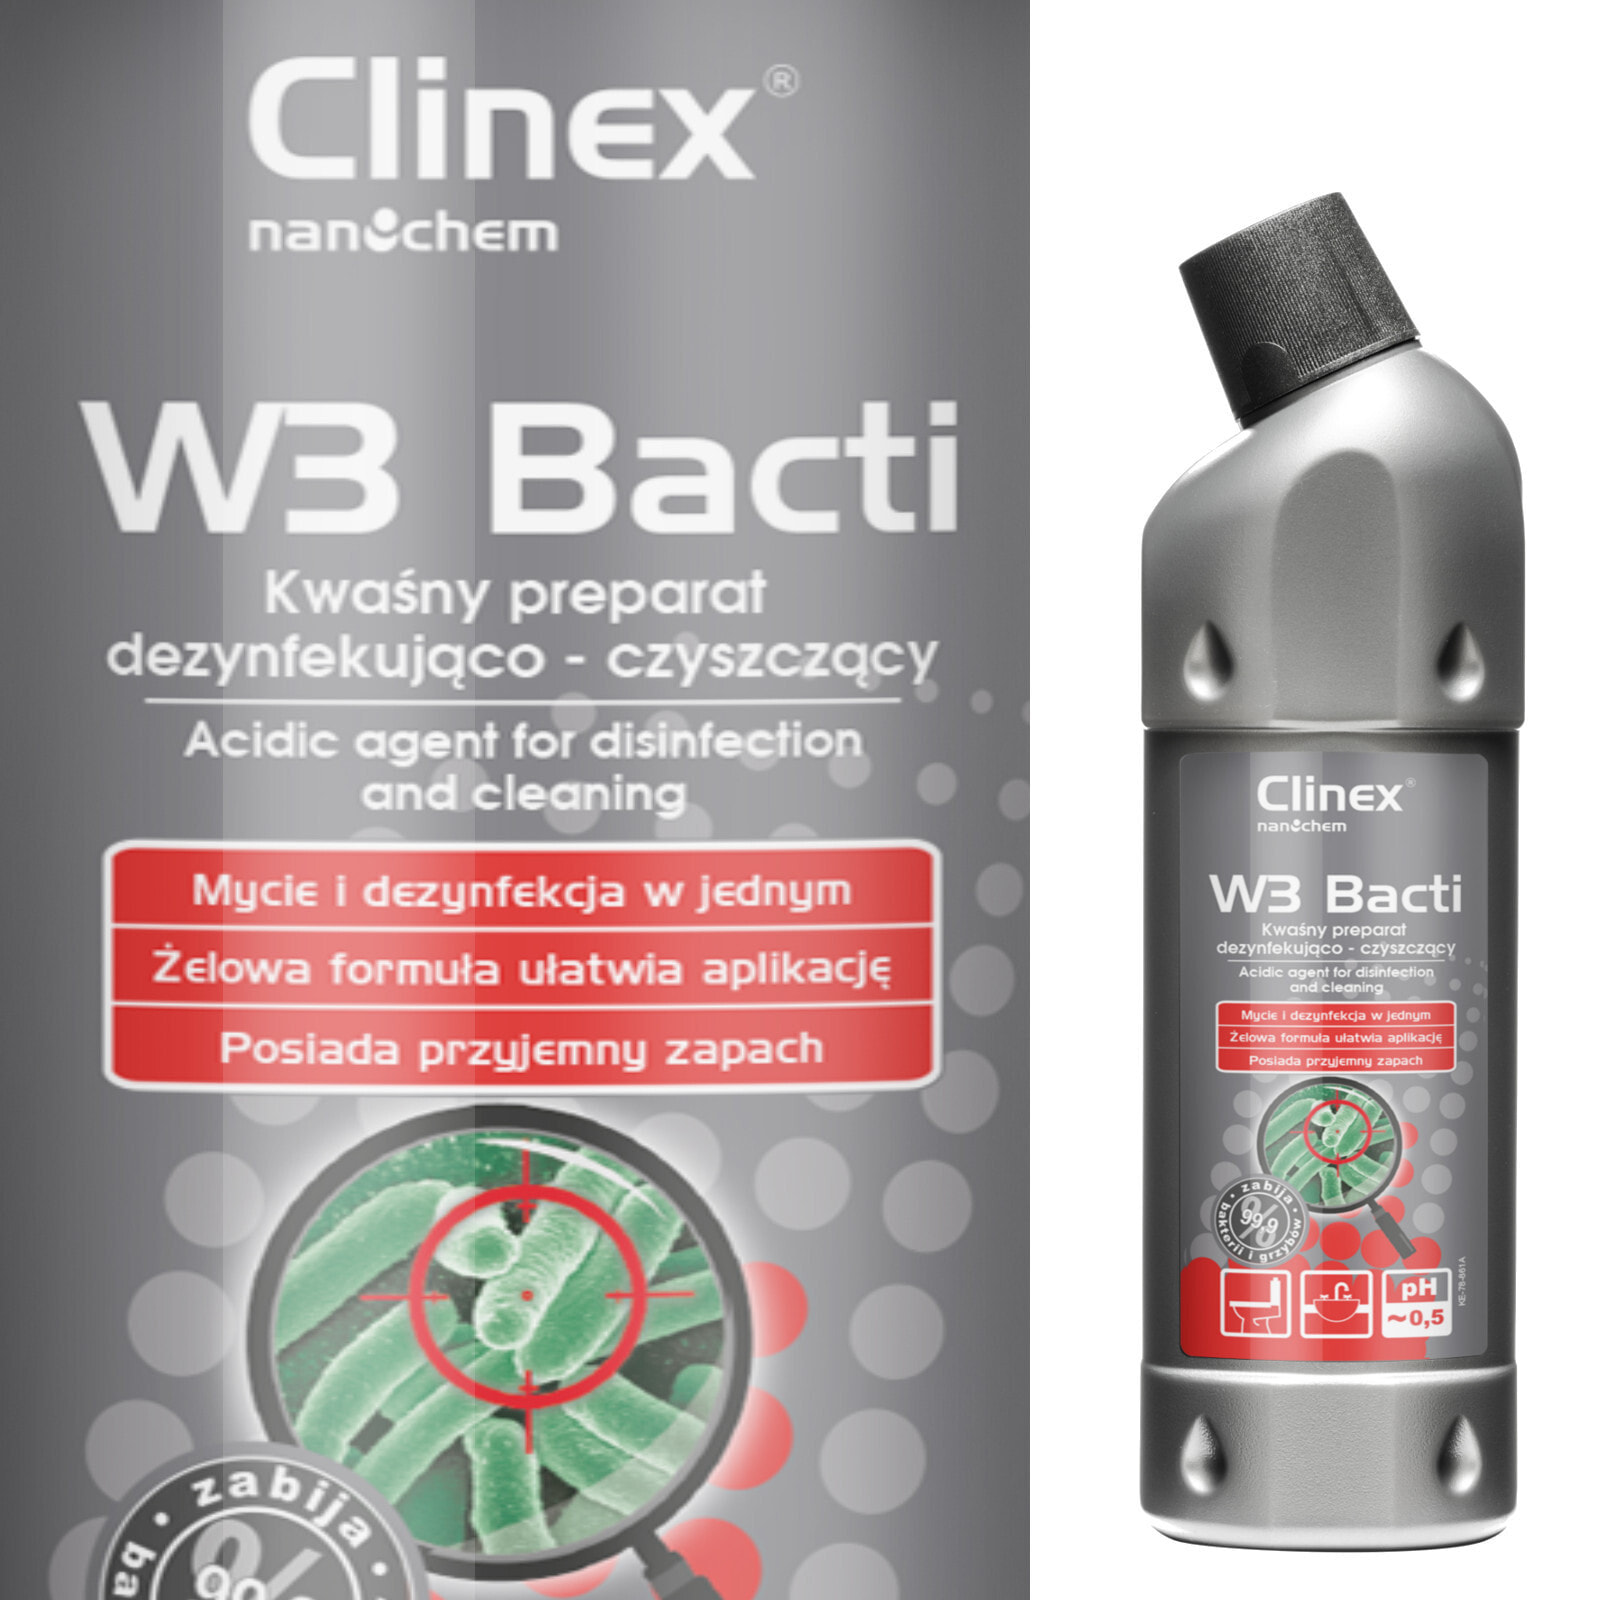 Bacti CLINEX W3 Bacti 1L bactericidal liquid for disinfection and fungusing of bathrooms and sanitary facilities